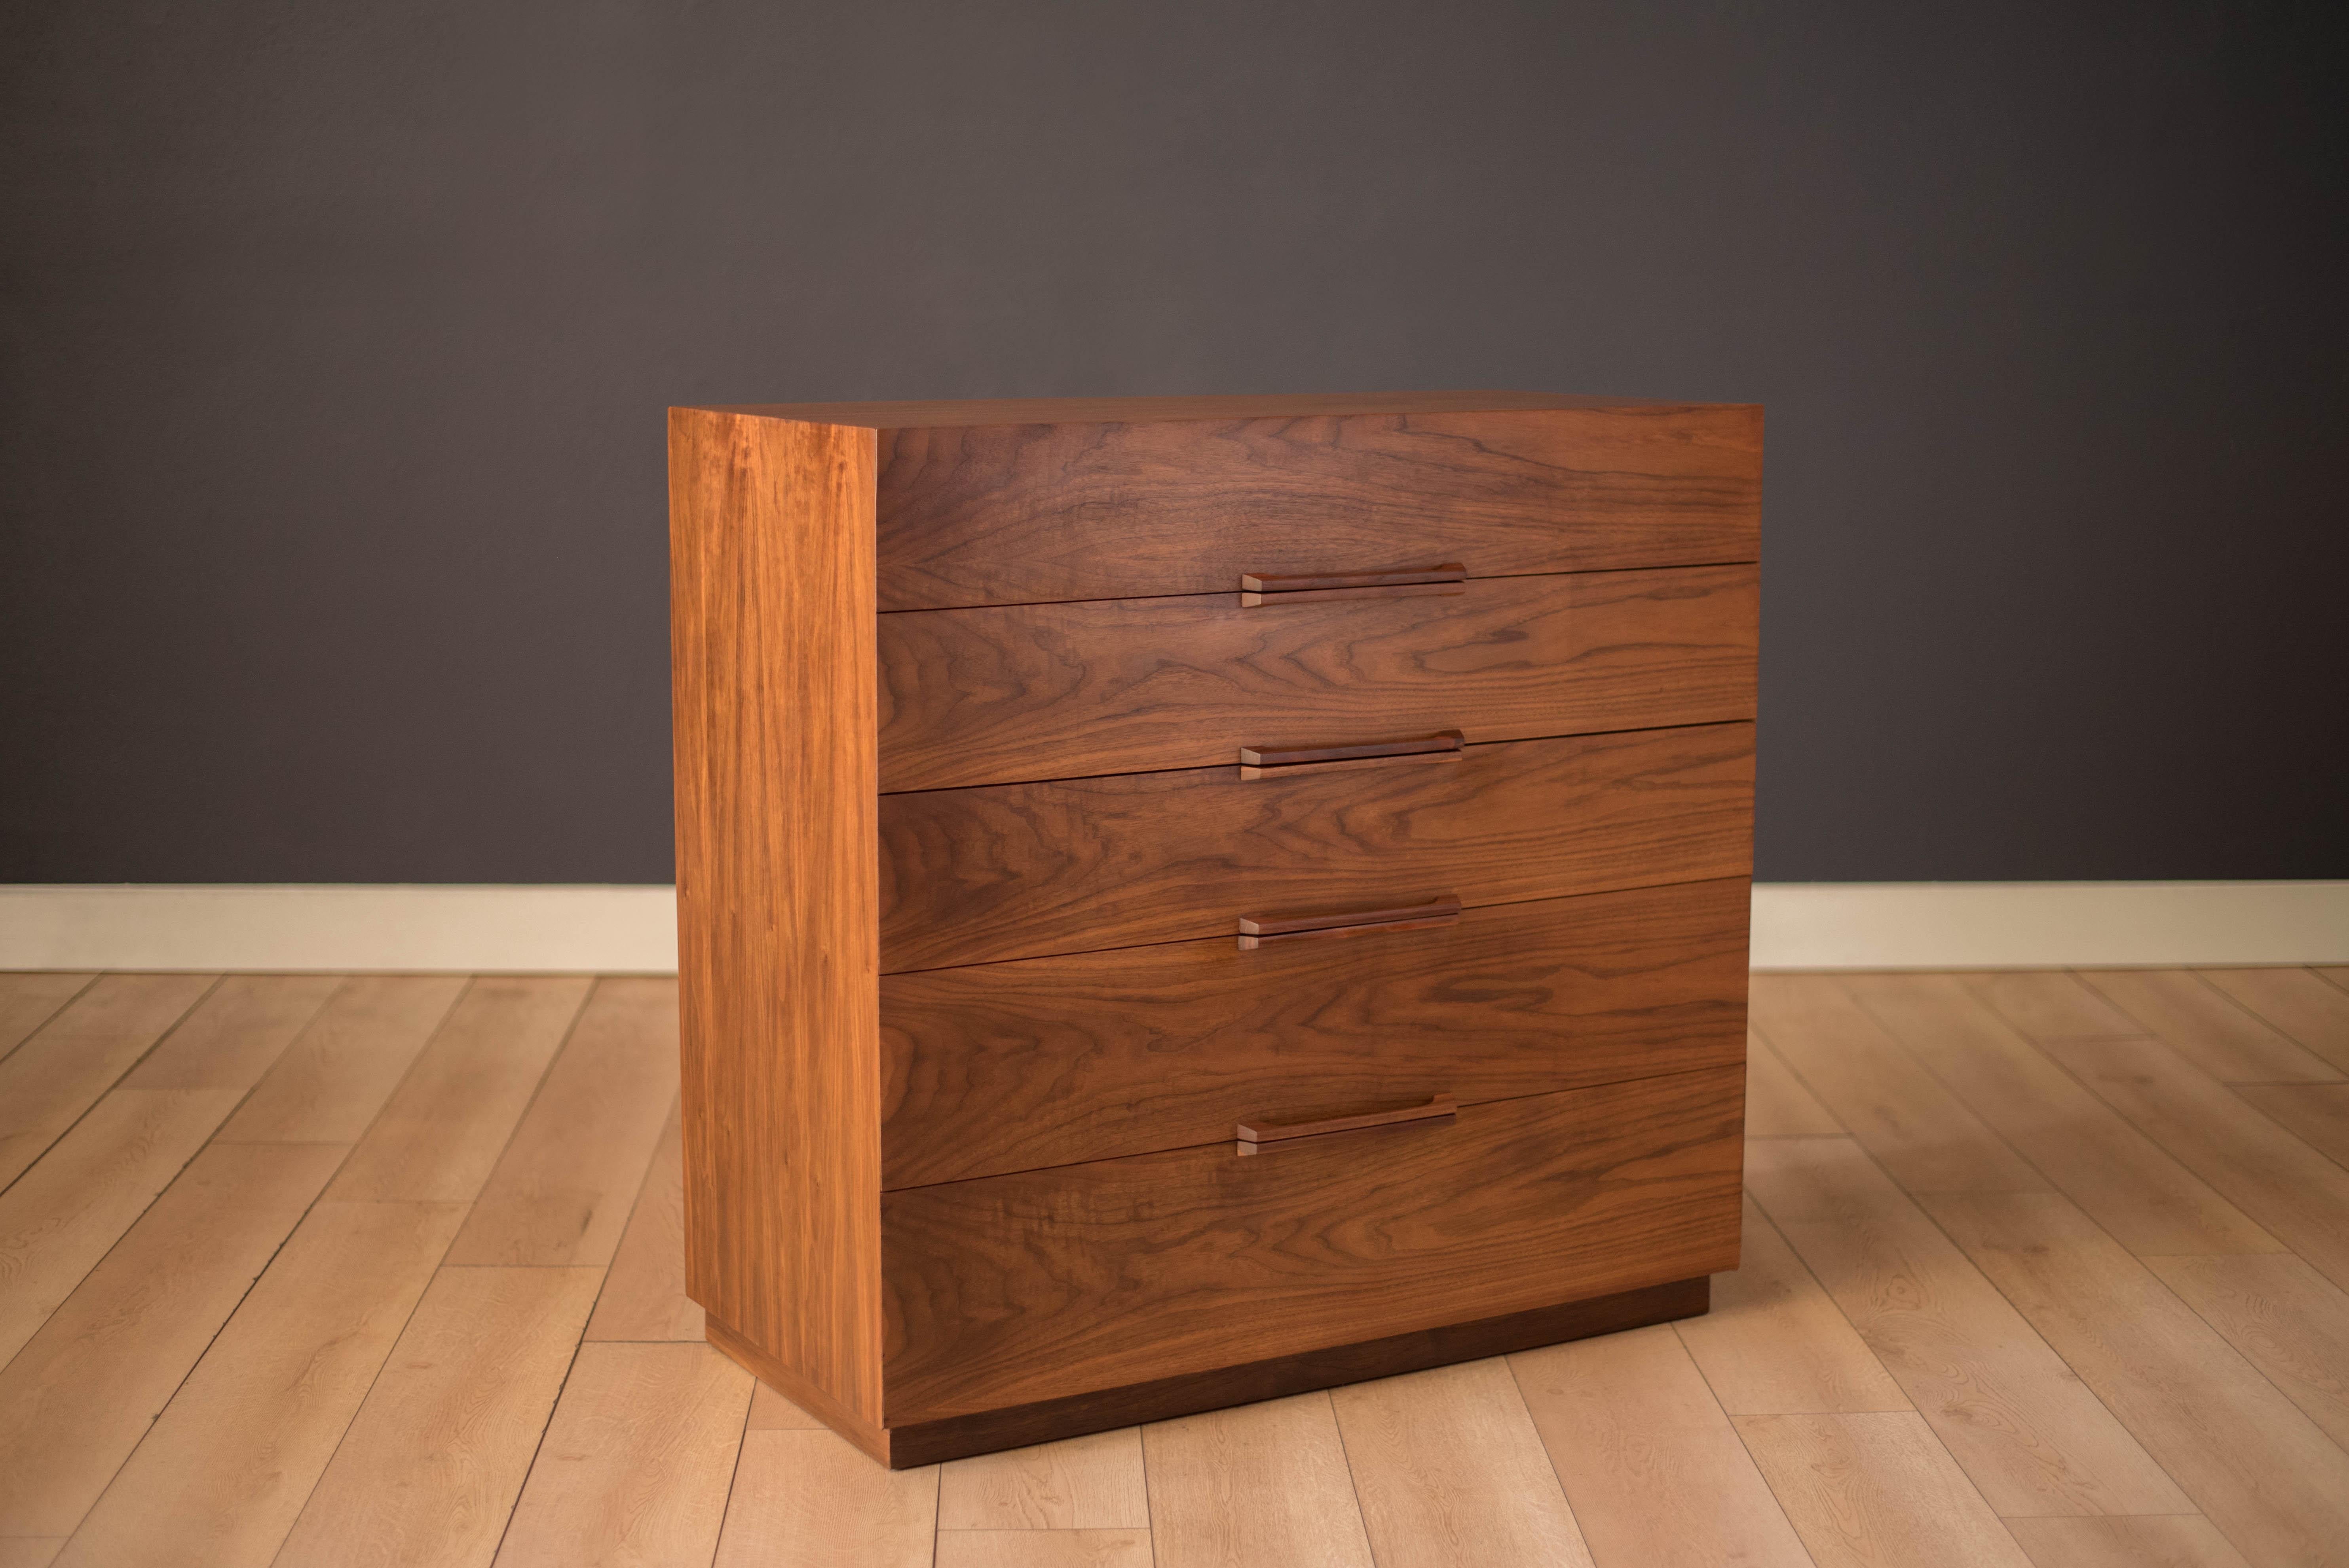 Vintage tall dresser in walnut manufactured by Ramseur Furniture Company, c. 1950's. This piece features a seamless beveled frame displaying bookmatched natural grains. Offers plenty of storage space including five drawers with dovetail construction.